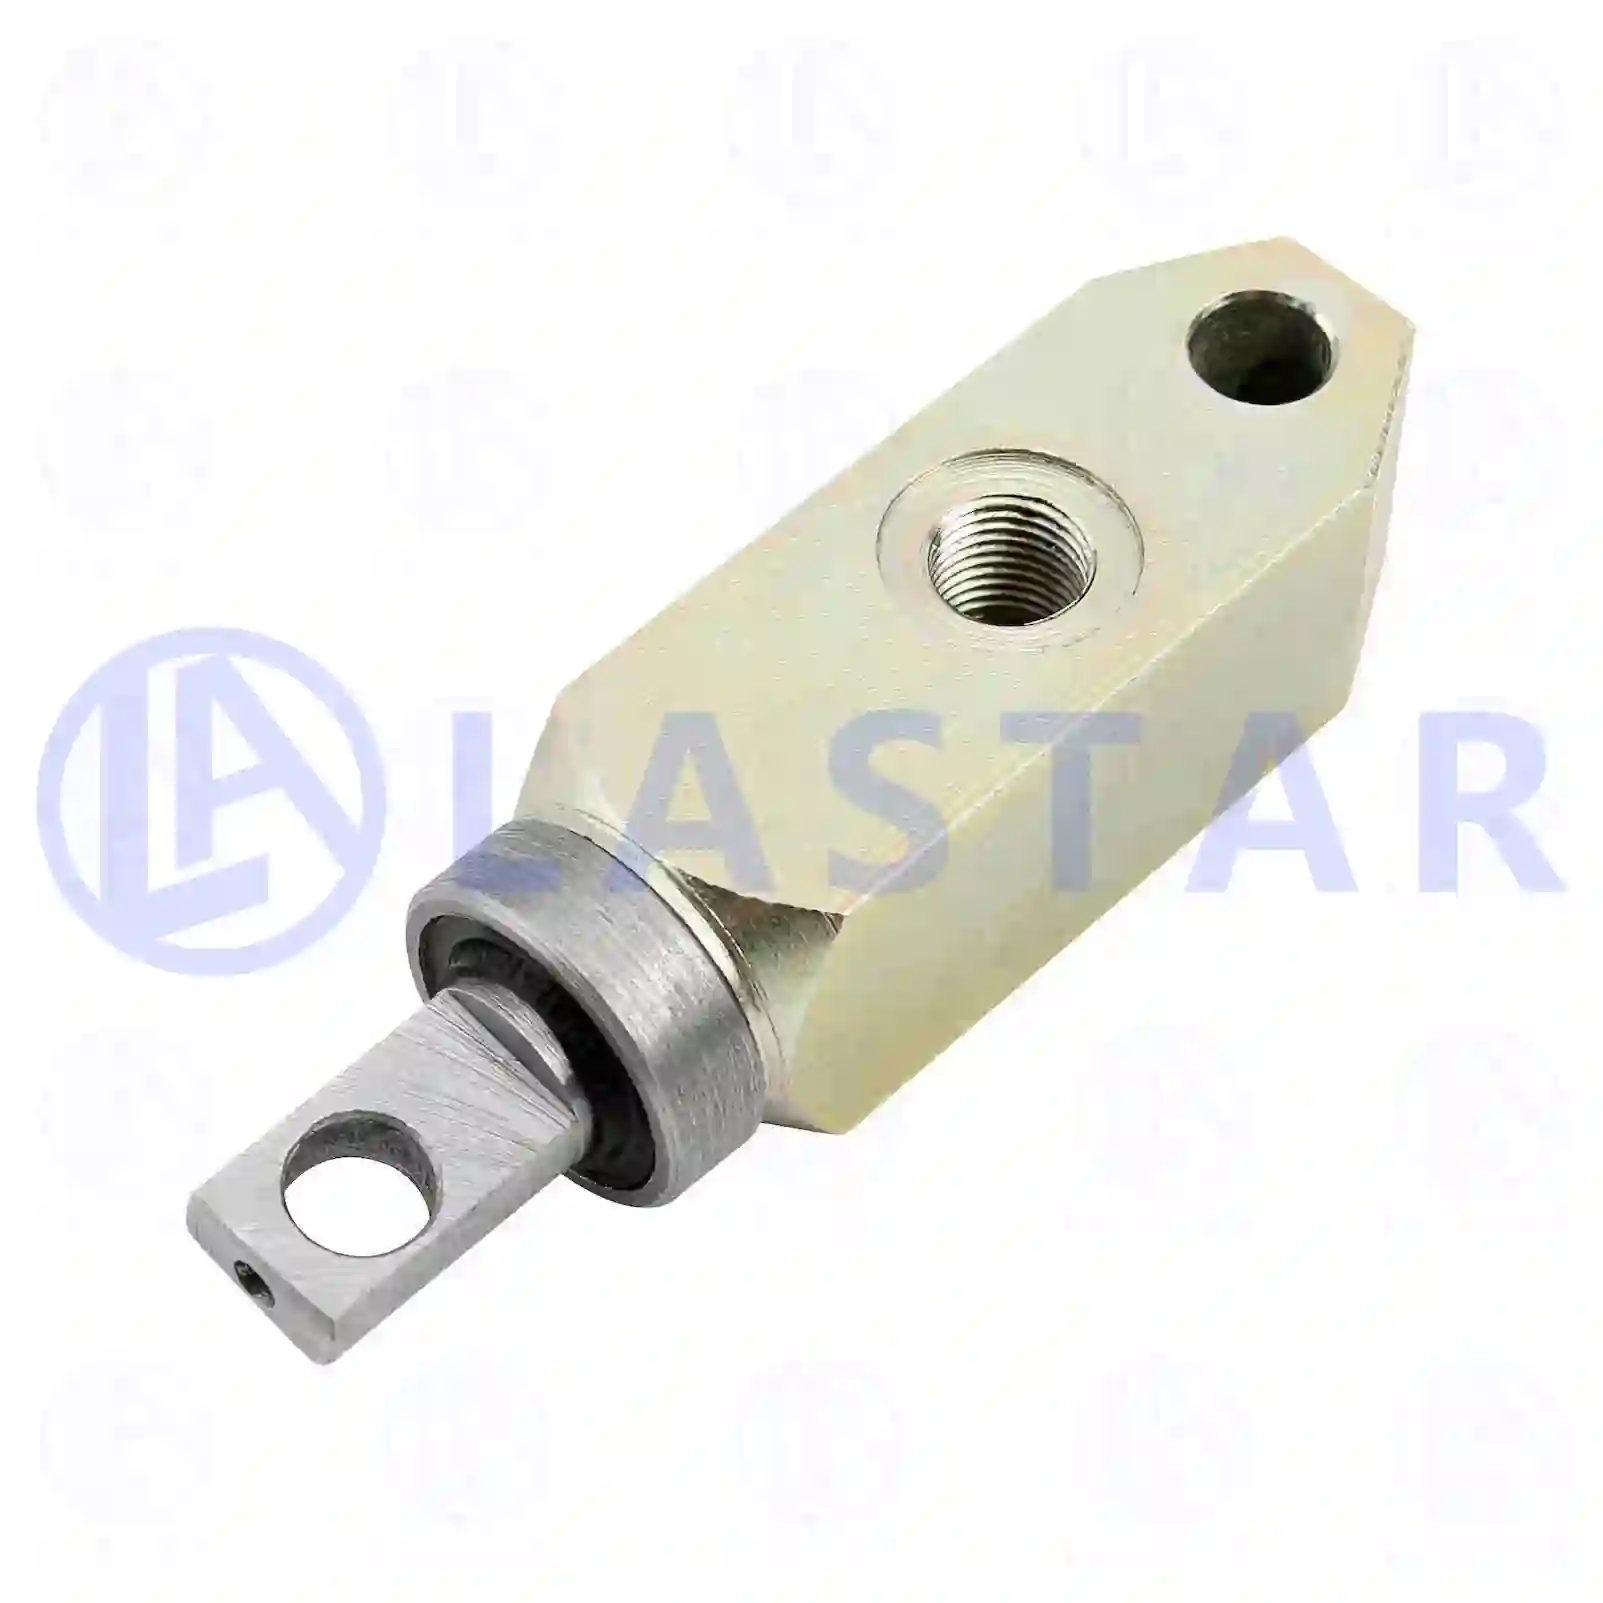 Shifting cylinder, 77732513, 3852600063, 3852600563, 9412600063 ||  77732513 Lastar Spare Part | Truck Spare Parts, Auotomotive Spare Parts Shifting cylinder, 77732513, 3852600063, 3852600563, 9412600063 ||  77732513 Lastar Spare Part | Truck Spare Parts, Auotomotive Spare Parts